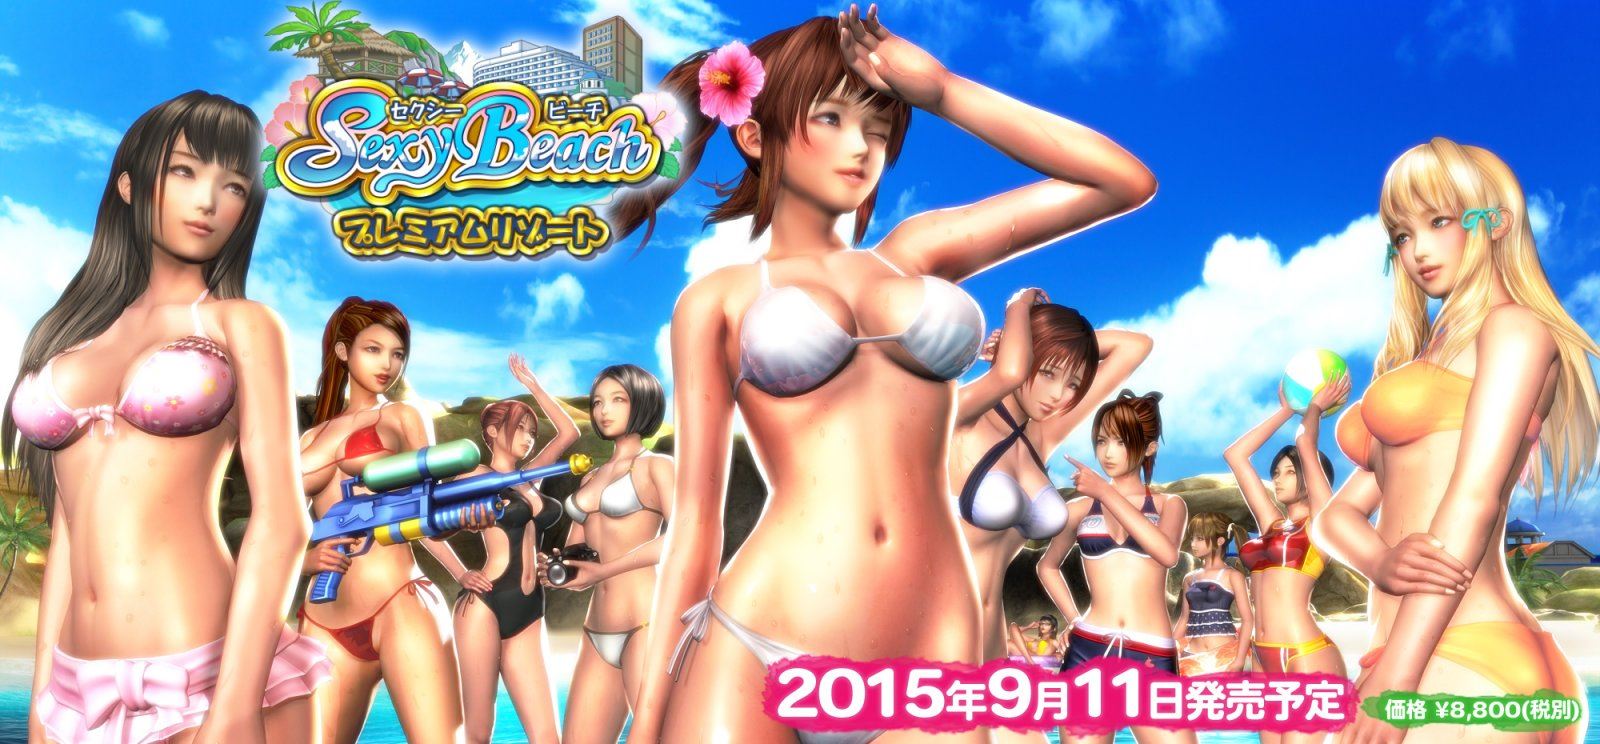 Japani Sexi Dawnlod - Sexy Beach Premium Resort Others Porn Sex Game v.Final Download for Windows